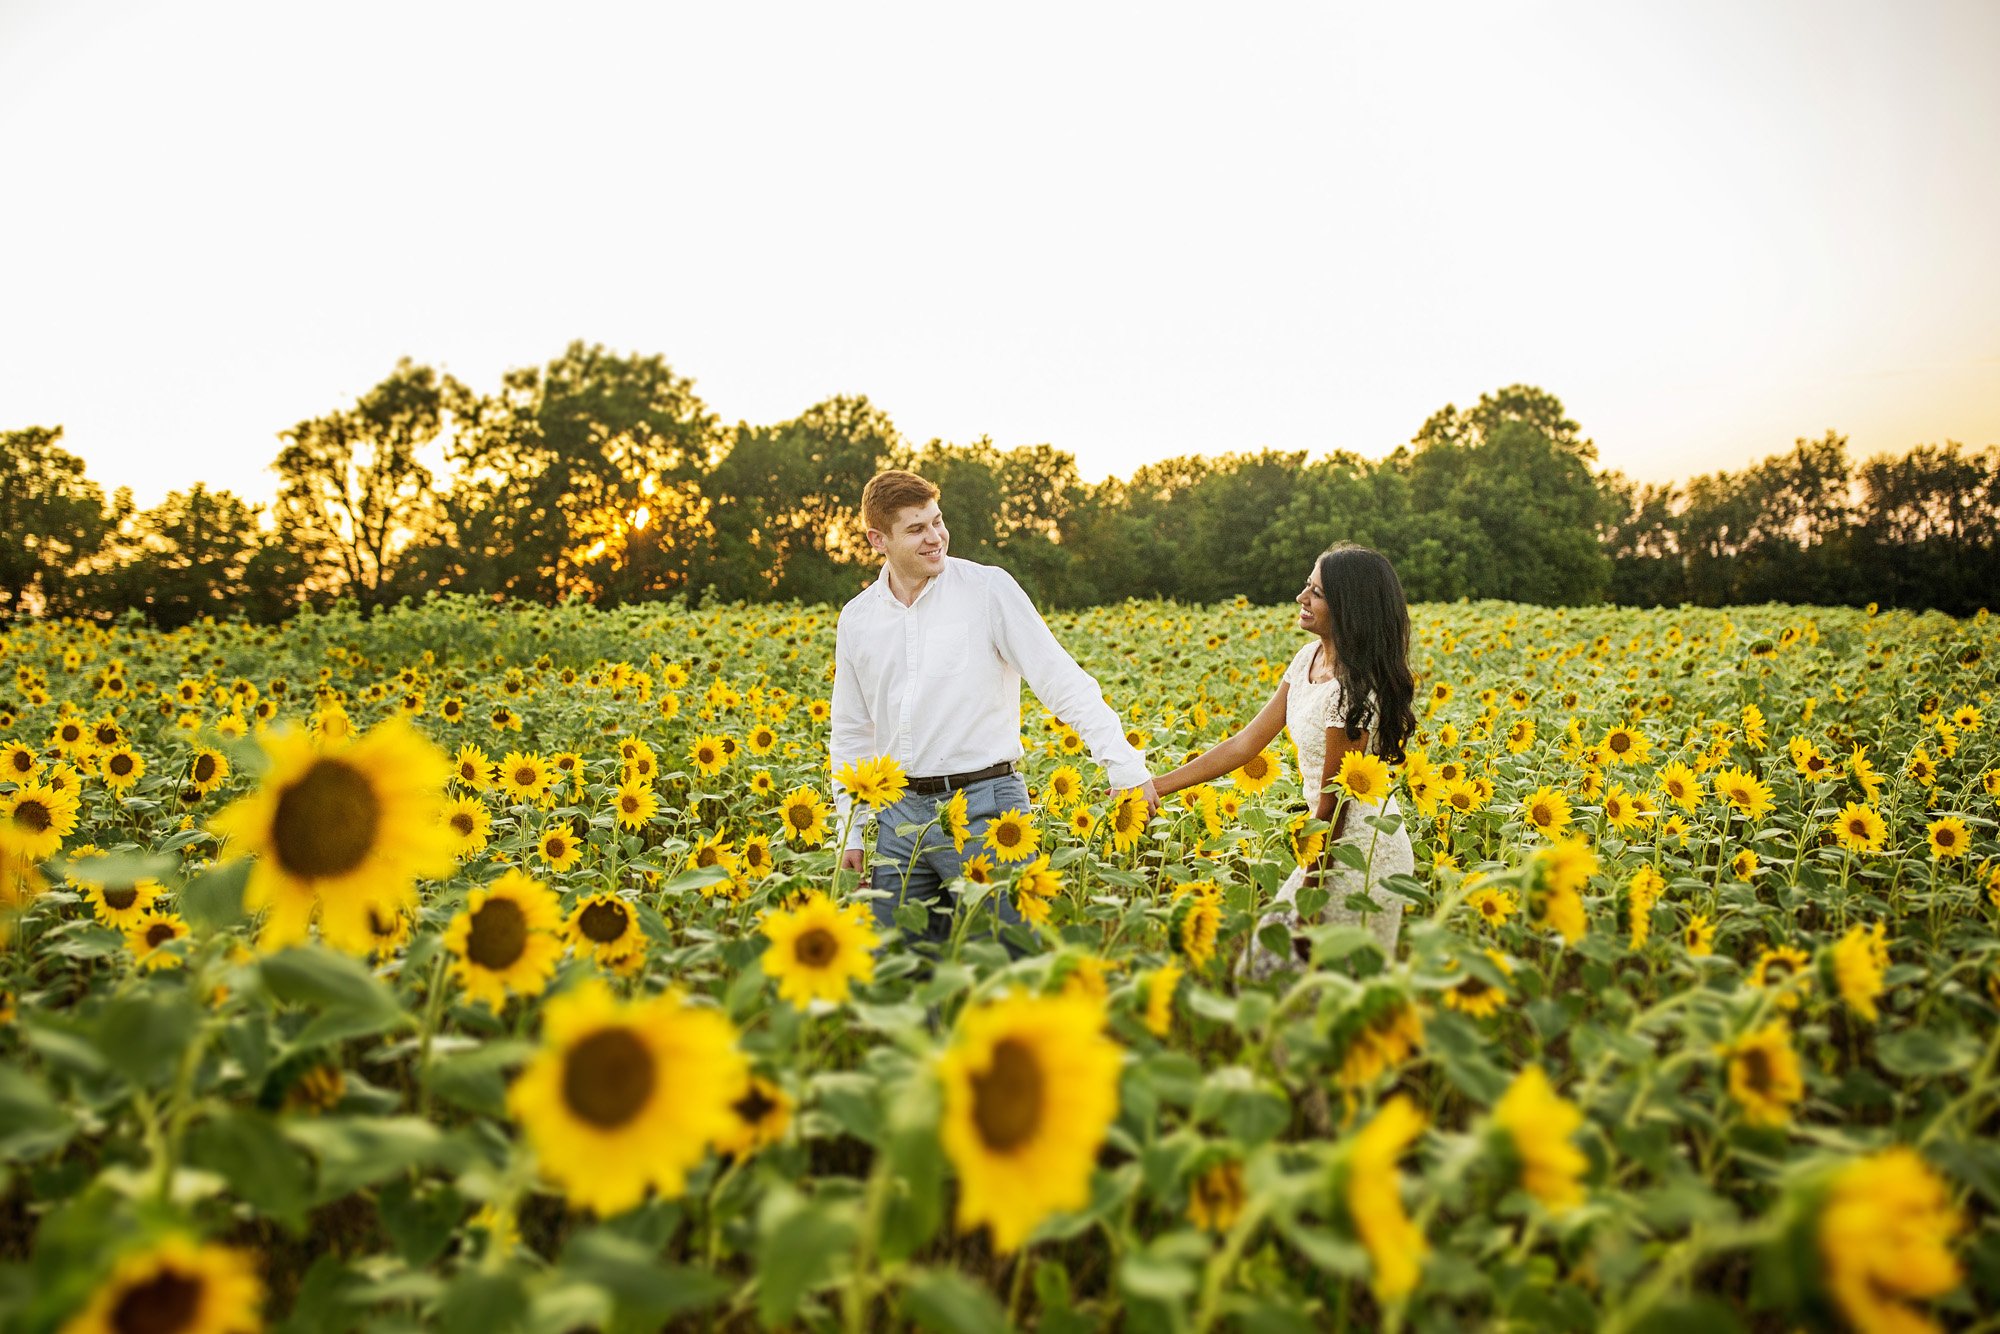 Seriously_Sabrina_Photography_Lexington_Midway_Kentucky_Engagement_Merefield_Sunflowers_Naz_and_Drew20.jpg